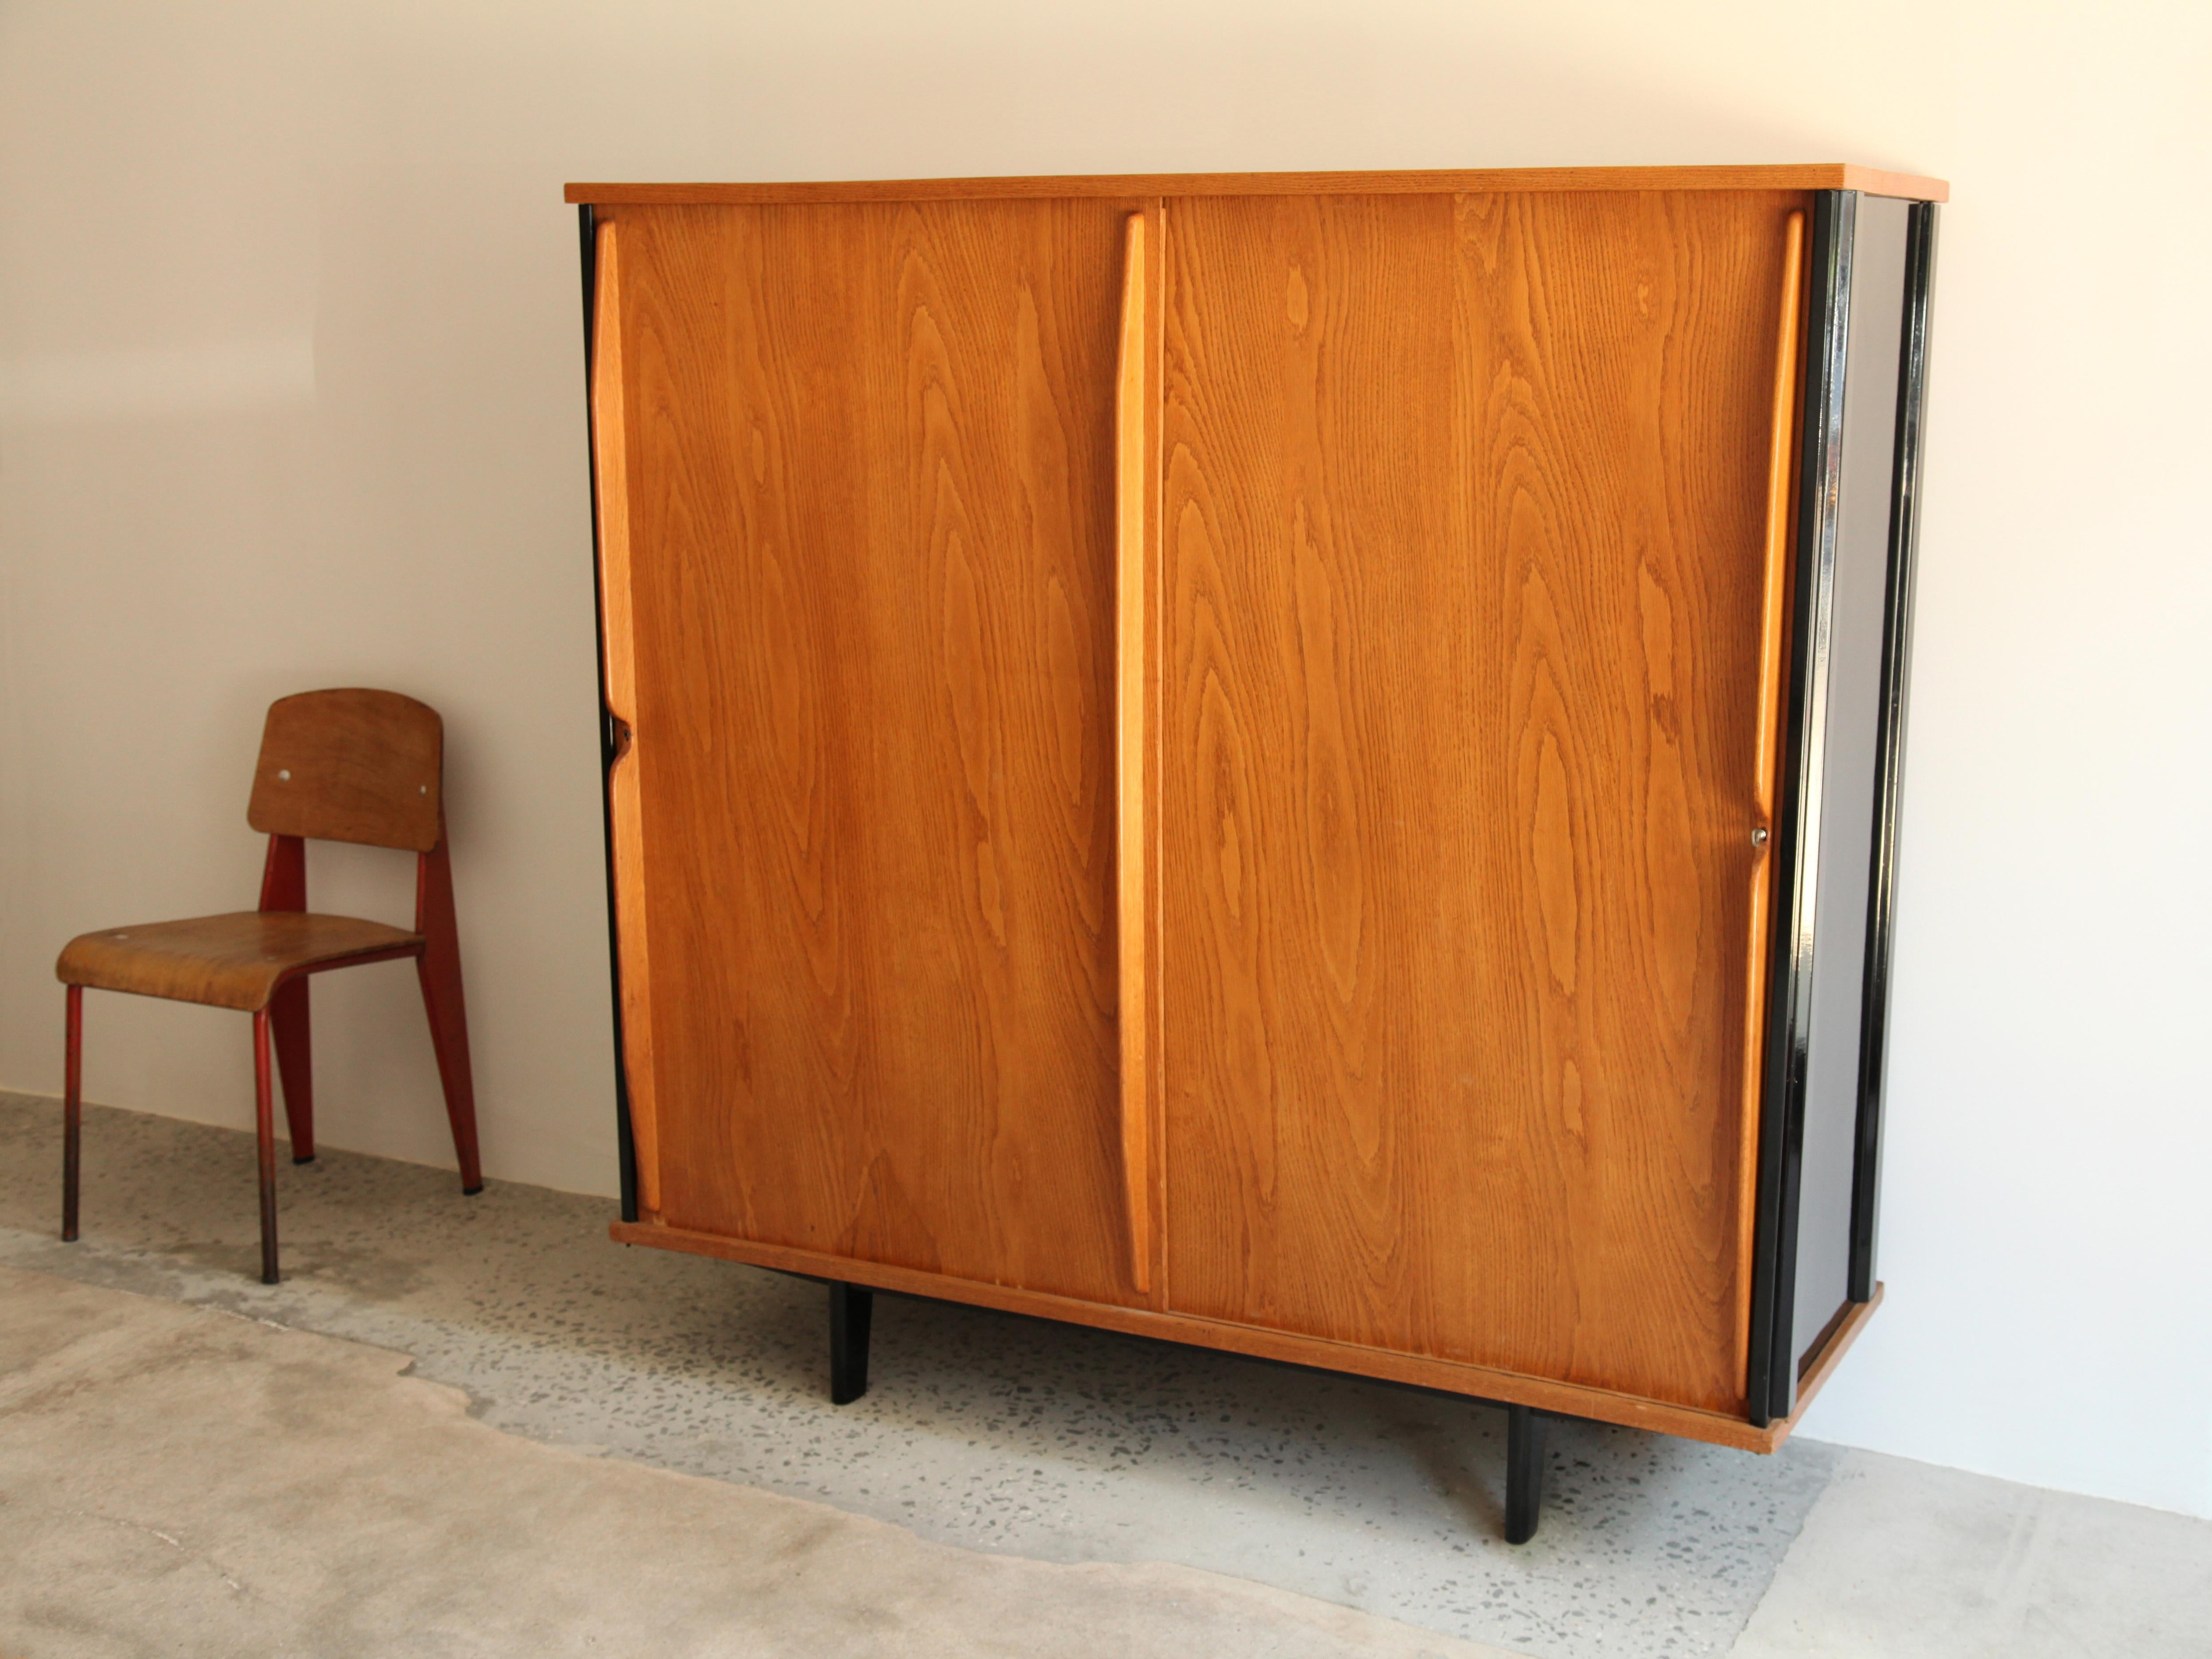 Cabinet model AG11 variant with lock by Jean Prouve and executed by Ateliers Jean Prouvé, circa 1947. Black lacquered steel, solid oak and oak plywood.